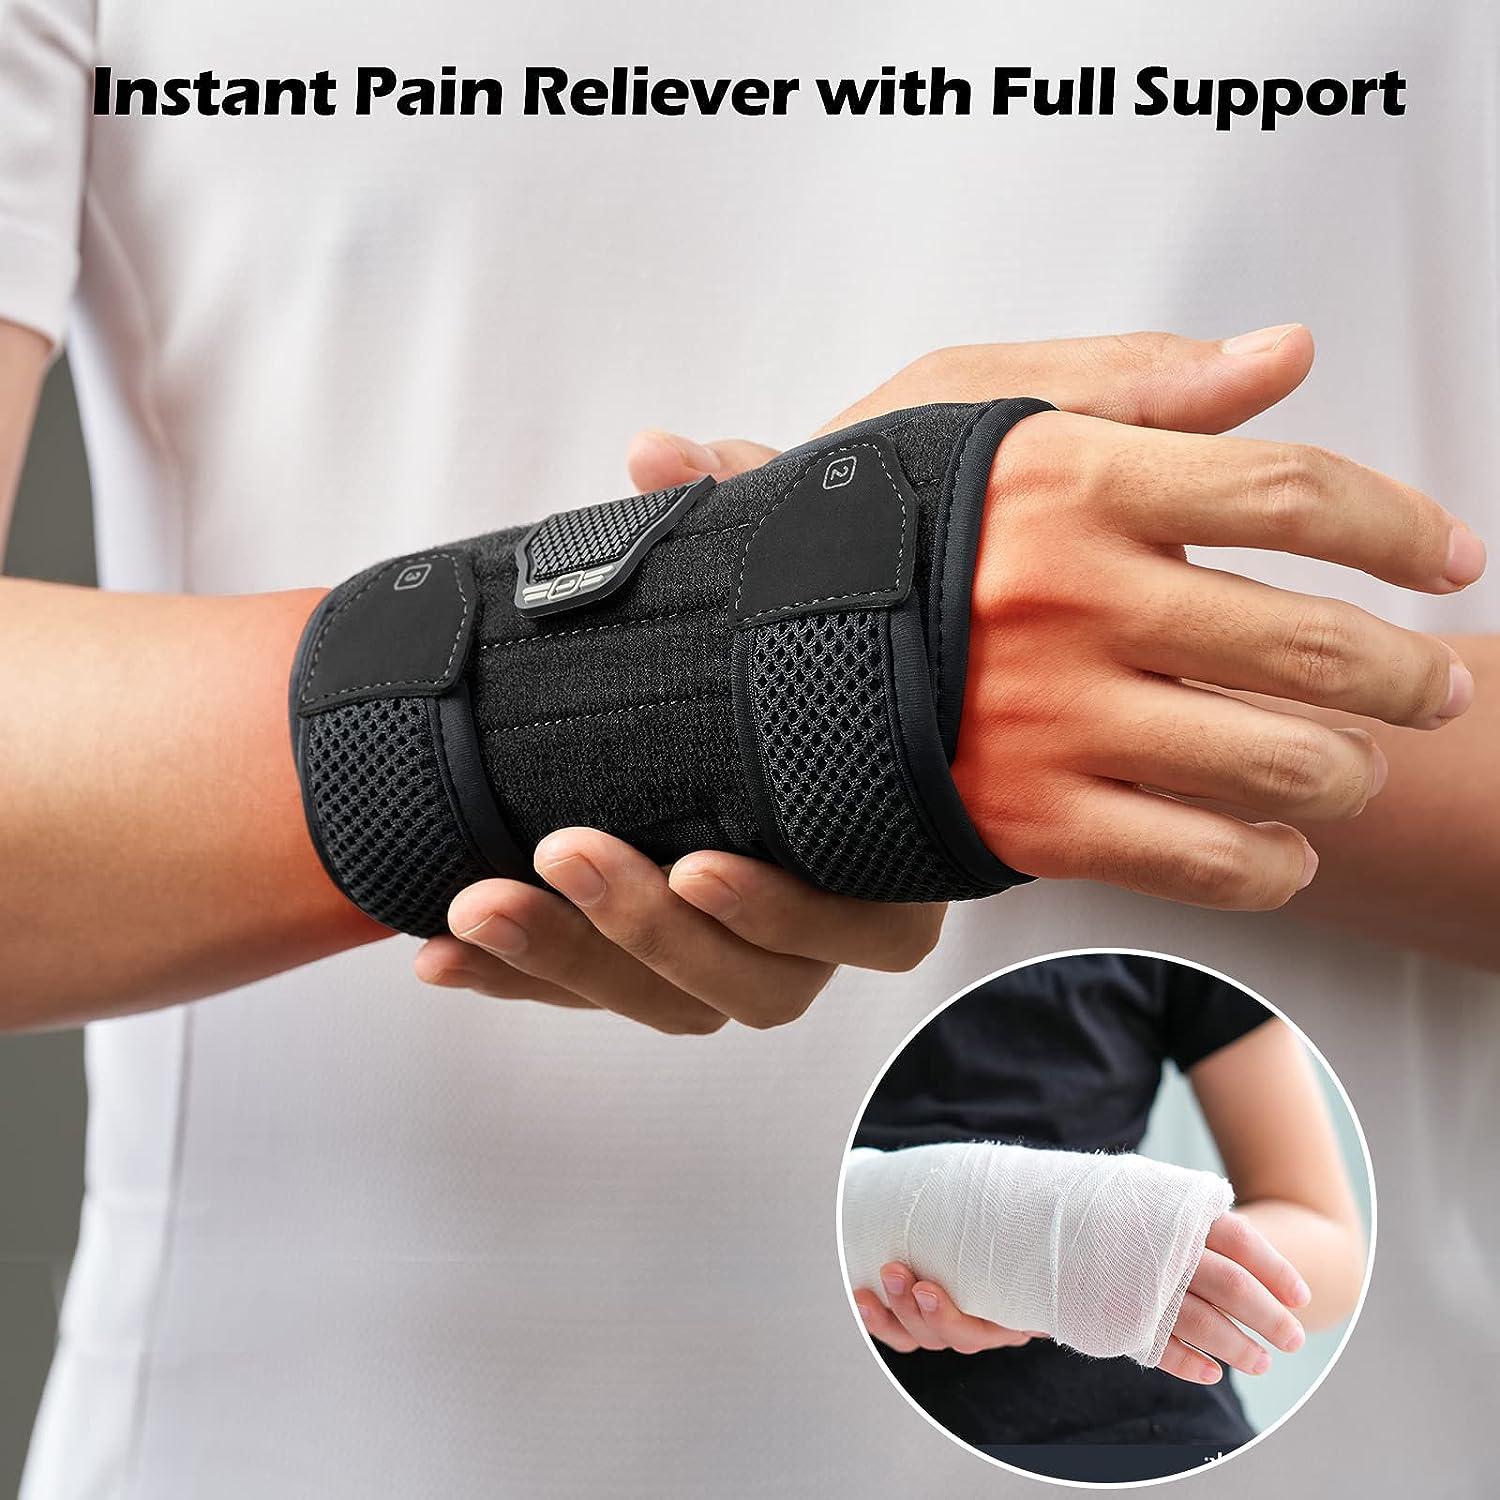 FREETOO Wrist Brace for Carpal Tunnel Relief, Strongest Wrist Support  Splint with 3 Stays for Women Men, Adjustable Hand Brace for Sleeping Right  Left